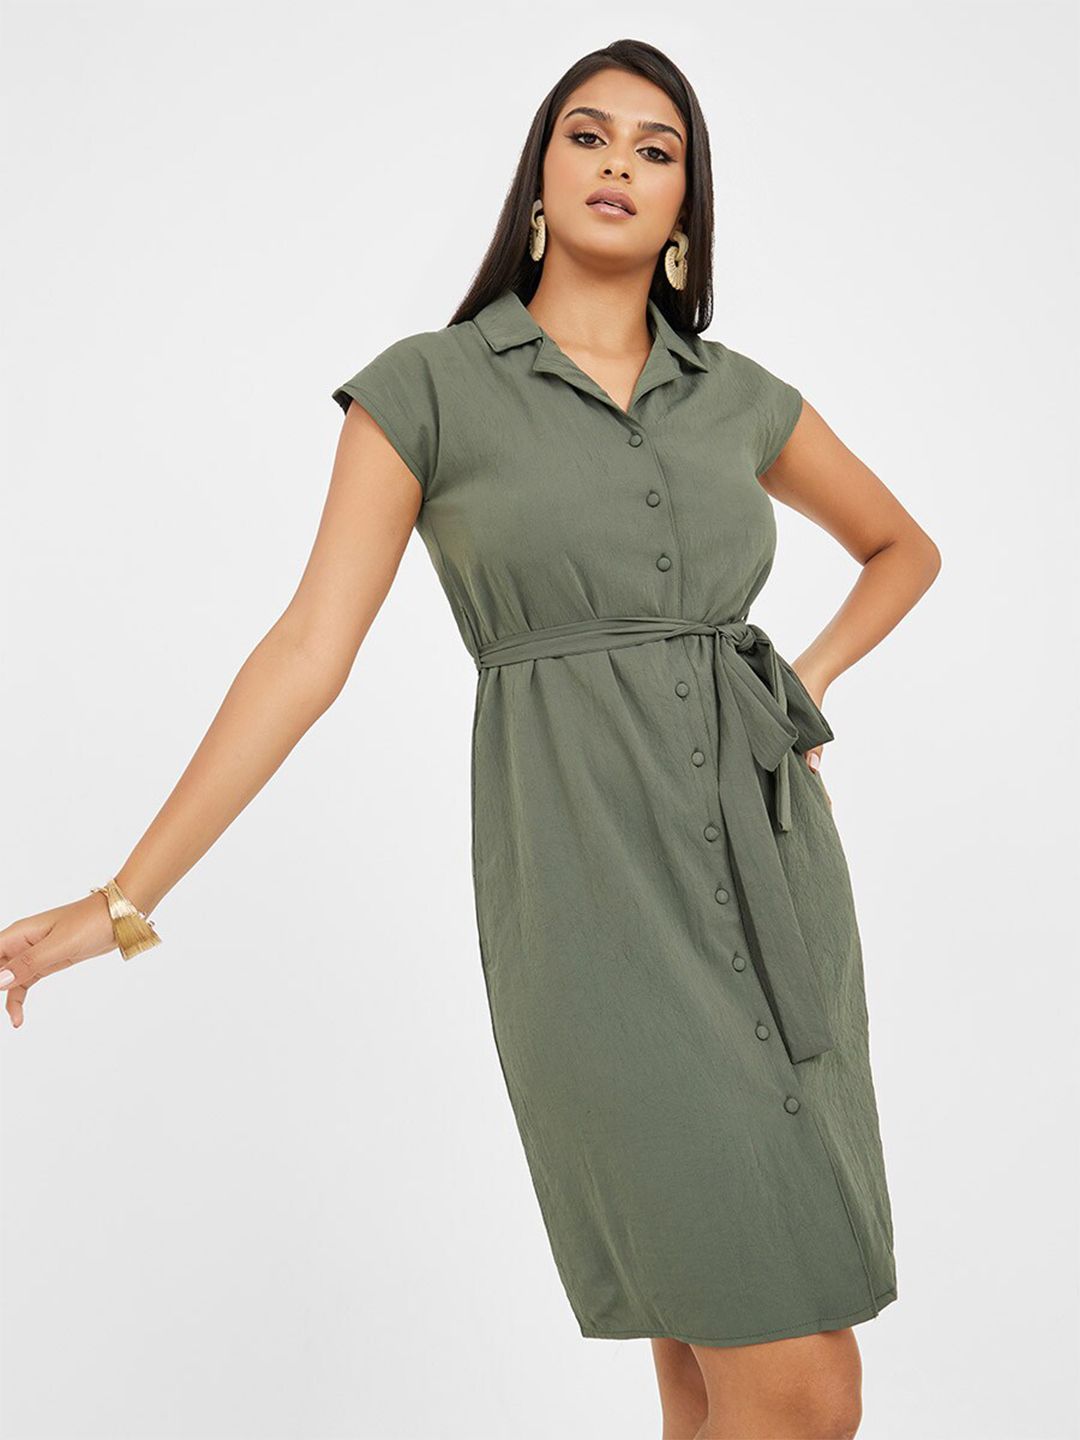 Styli Olive Green Shirt Dress Price in India